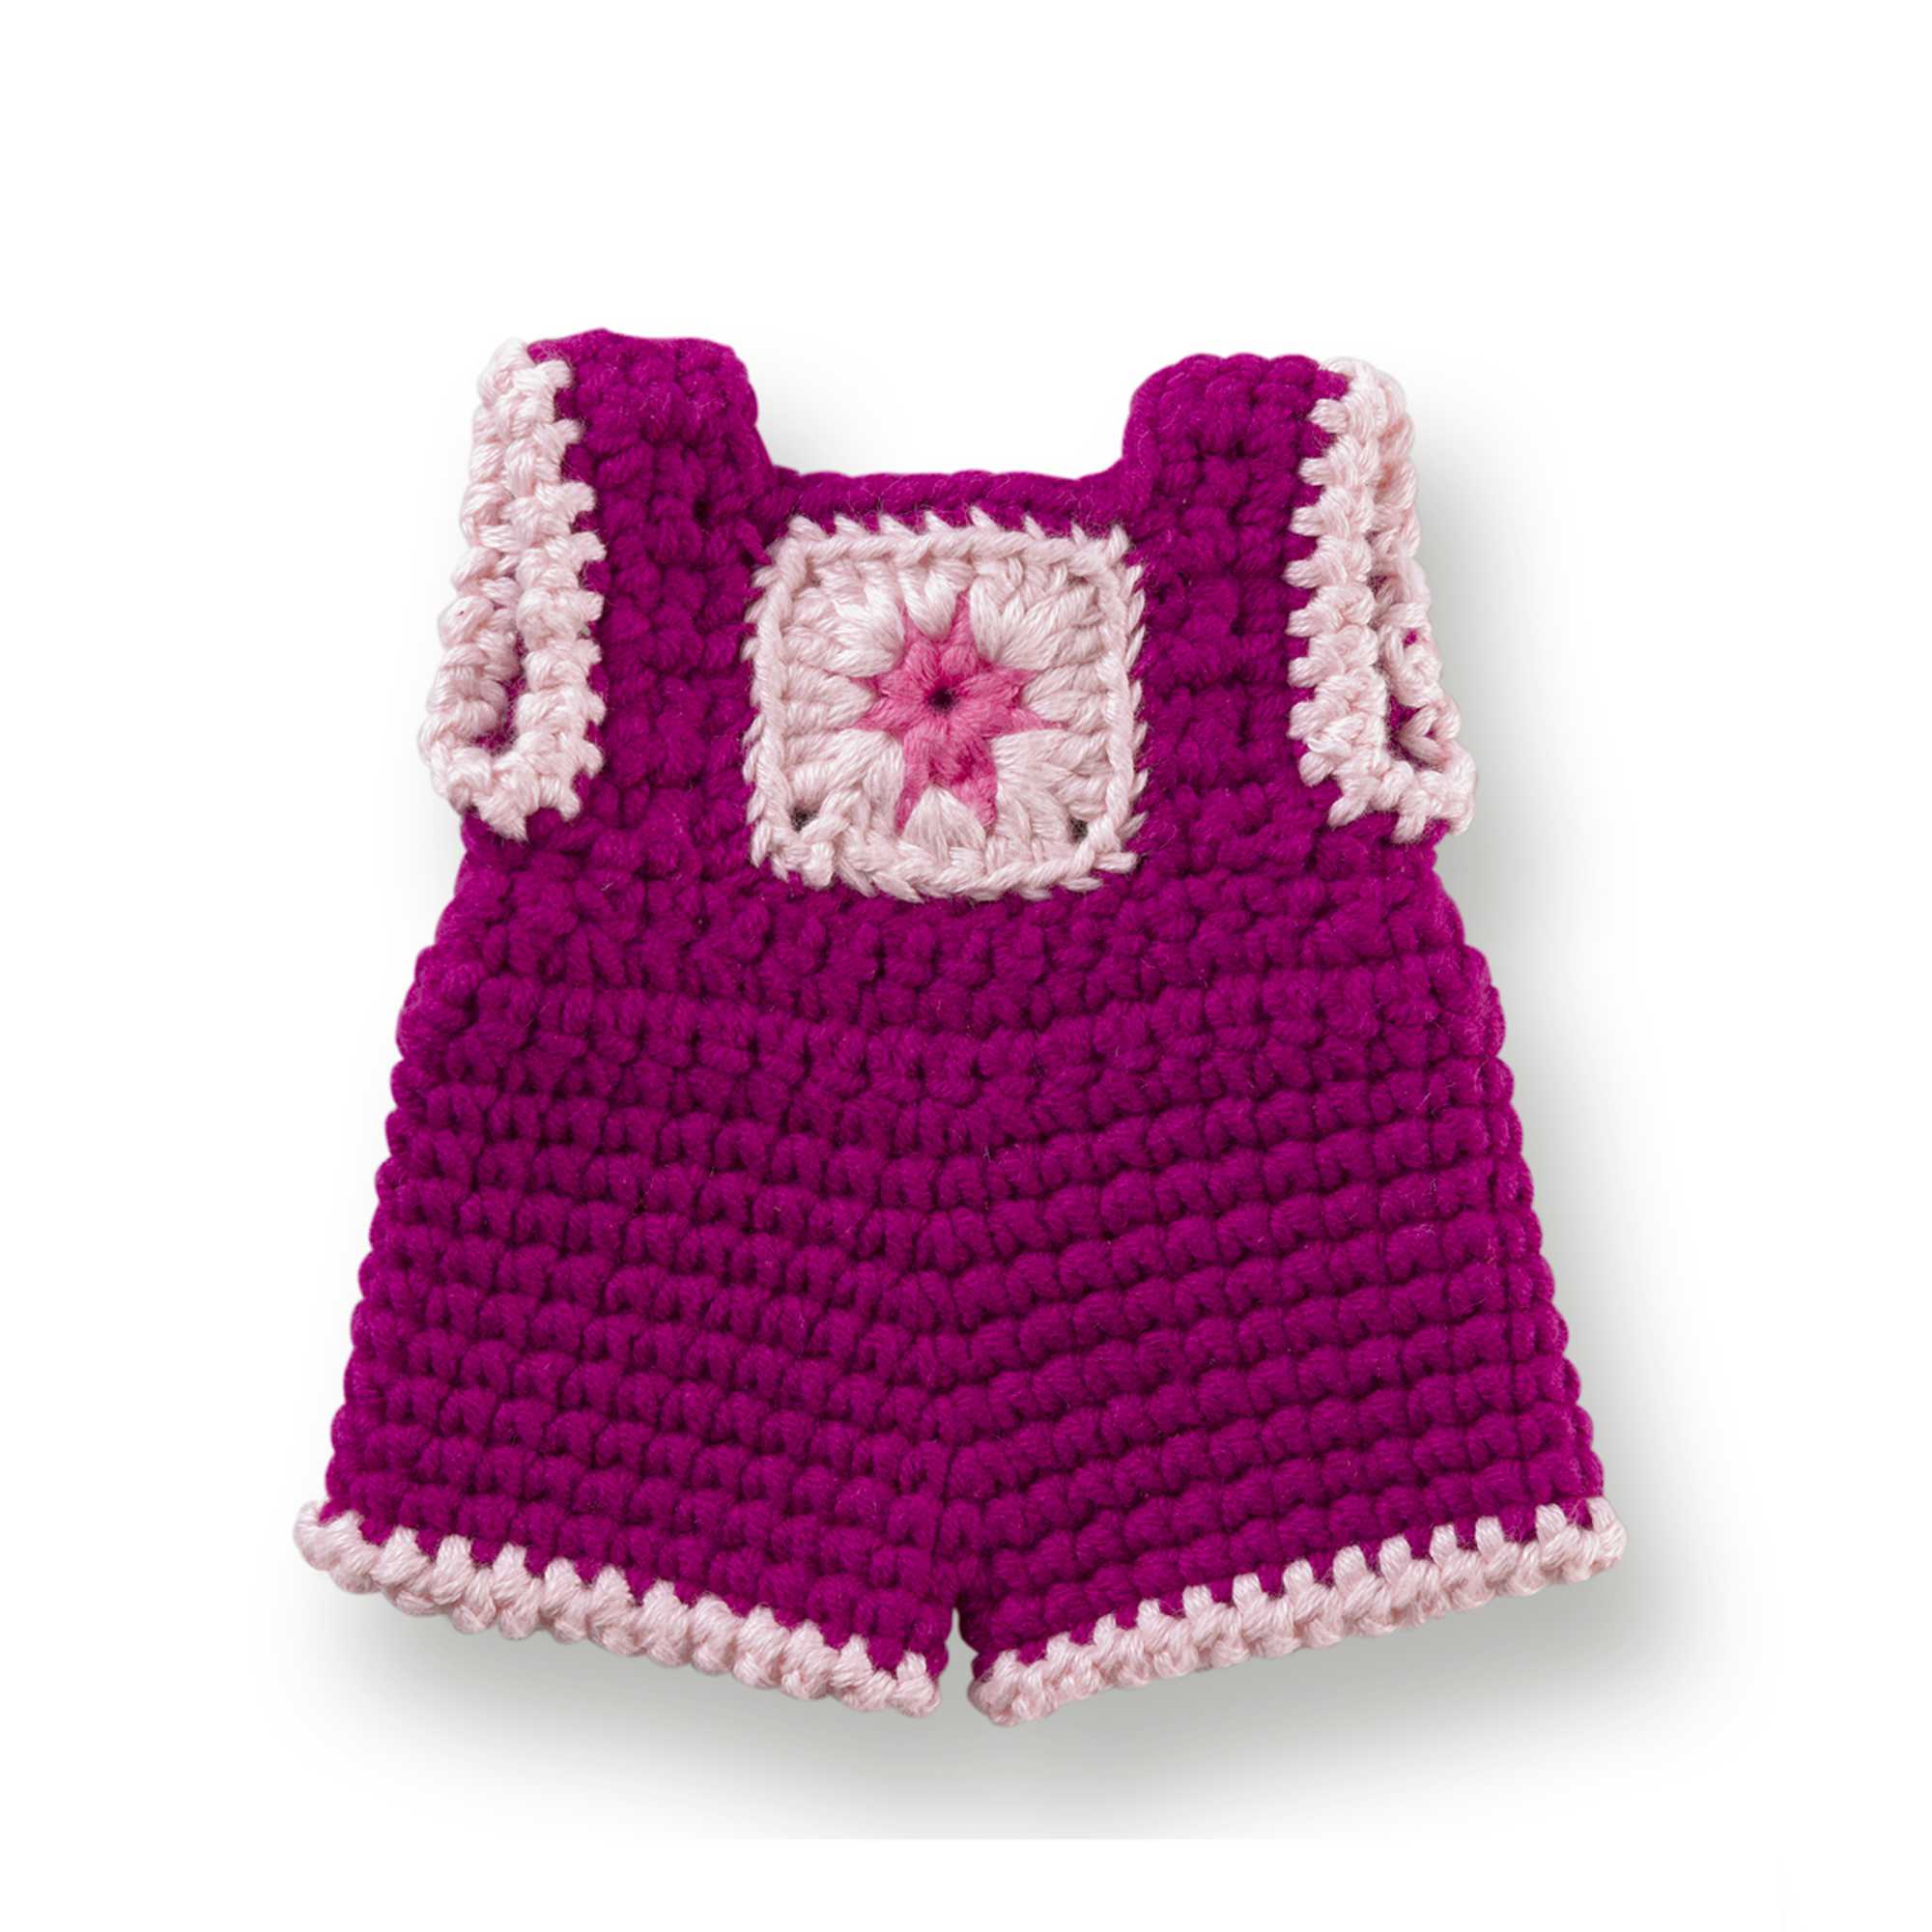 Just Dutch handmade crocheted outfit, Cerise jumpsuit